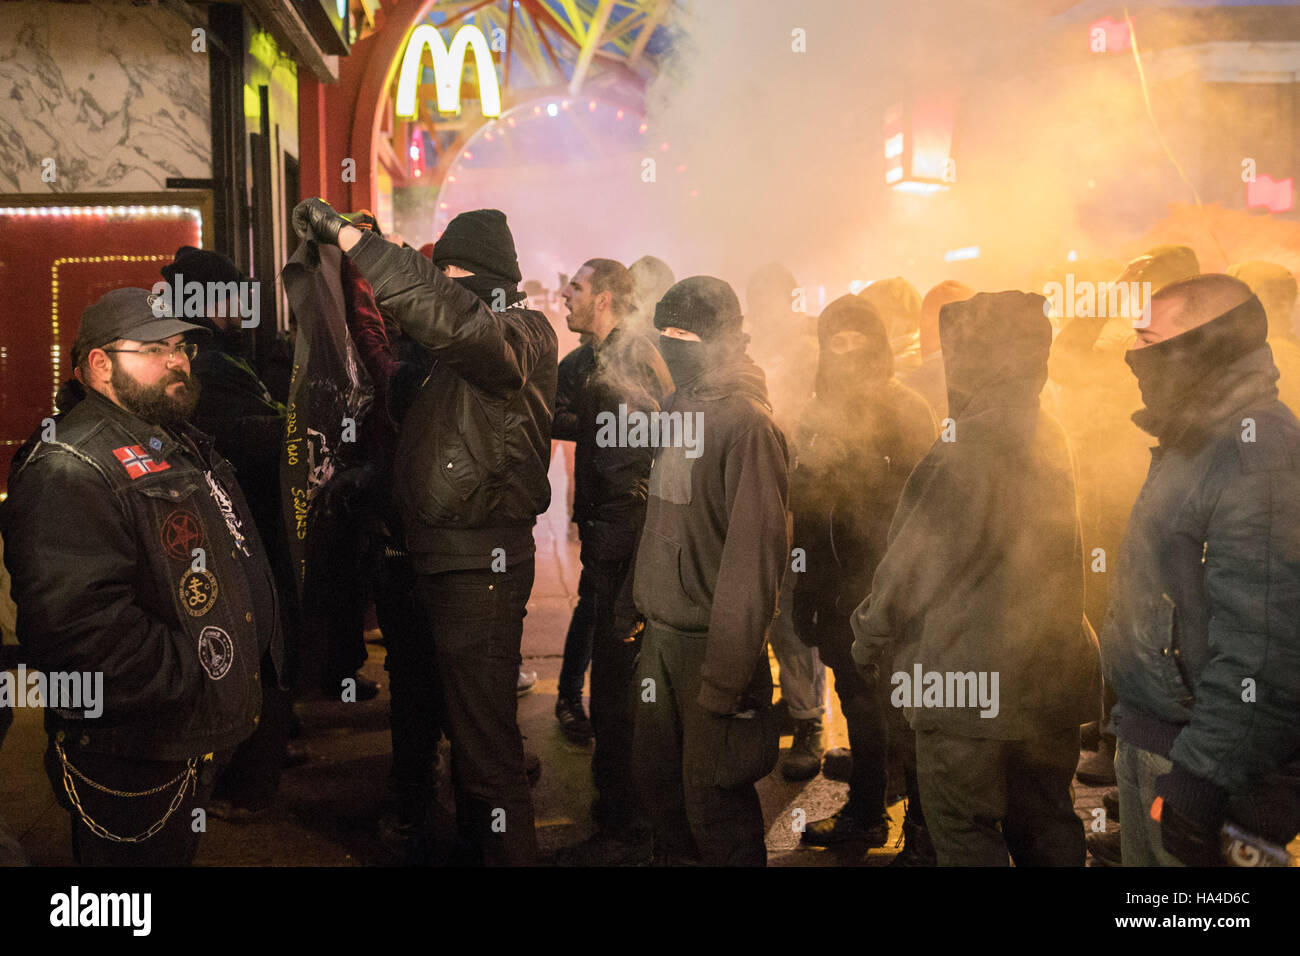 Montreal, Quebec, Canada. 26th November, 2016. Demonstrators clash with security outside the Theatre Plaza as they protest against a concert by Polish black metal rock band Graveland. Protesters labelling themselves 'anti-fascists militants' were protesting what they call a racist band. Dario Ayala/Alamy Live News Stock Photo